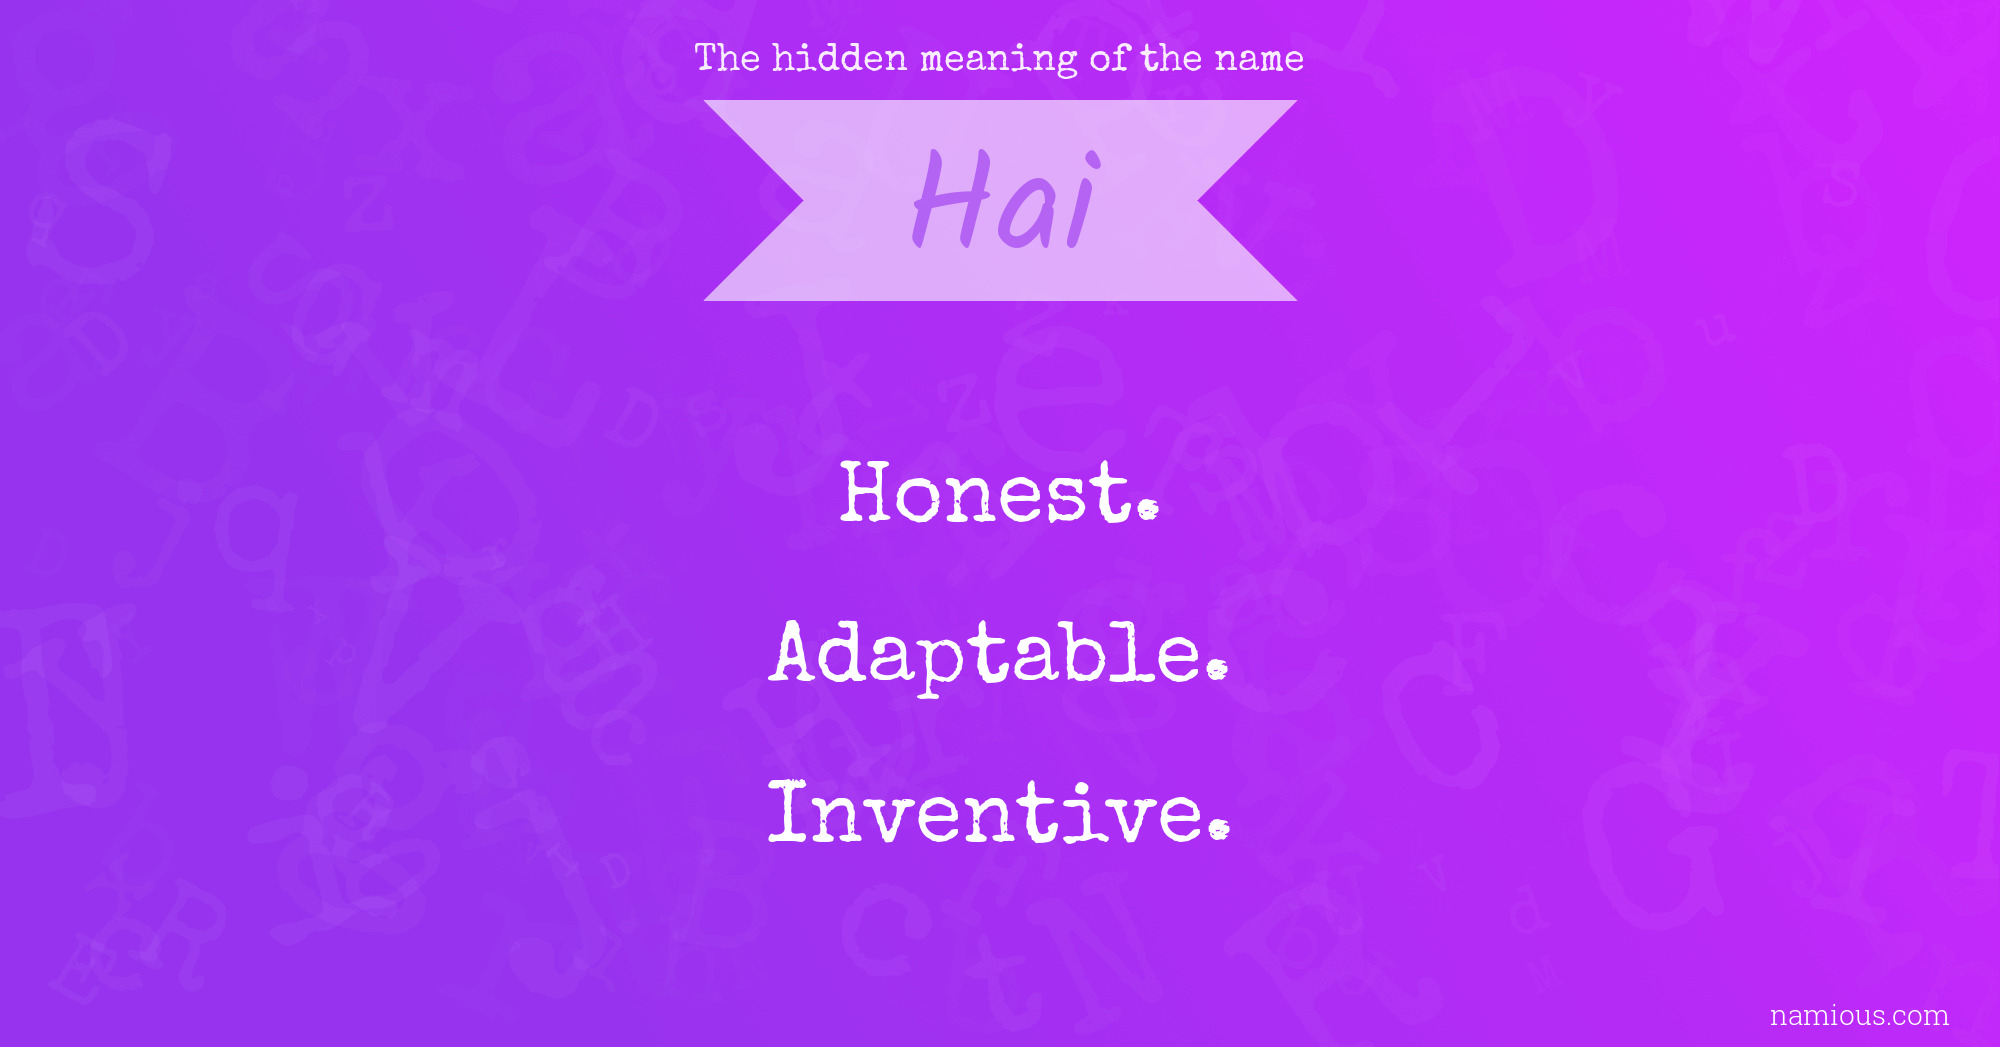 The hidden meaning of the name Hai